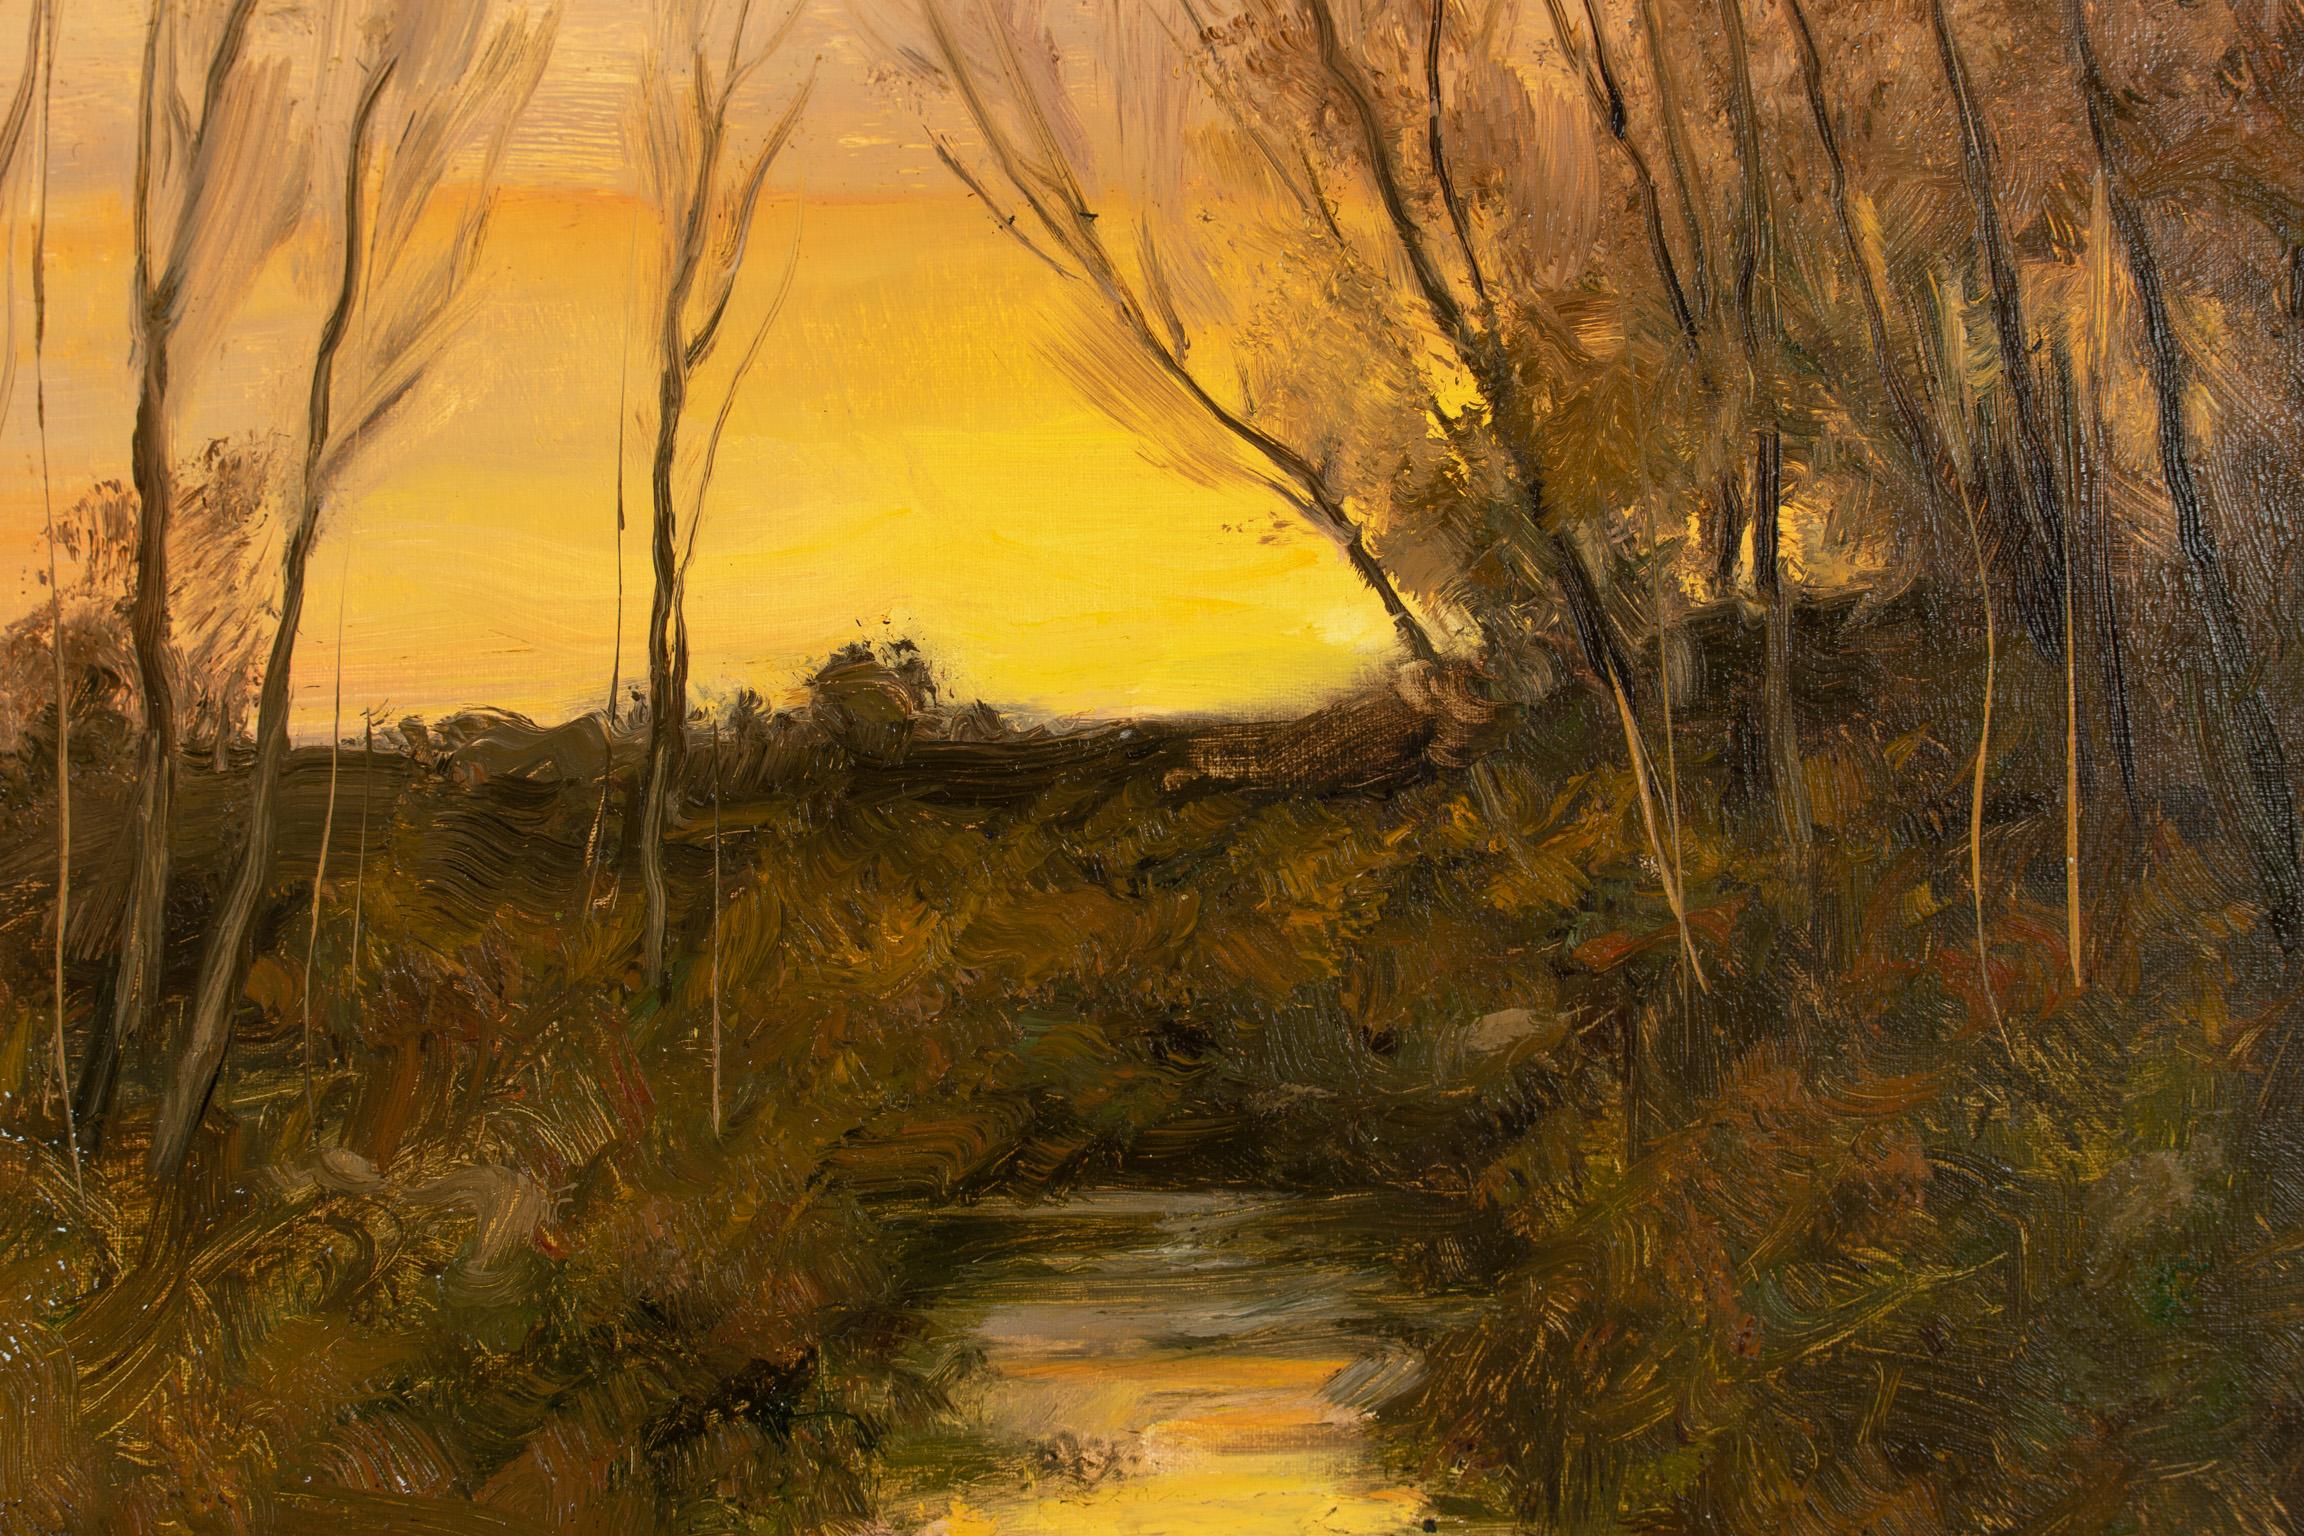 This piece is framed. The unframed dimensions are 12 x 12 inches.

Sheehan studied under George Gabin, who paints in a tight and traditional style. There, he learned the technique of American Tonalism, the contrast between light and dark, and